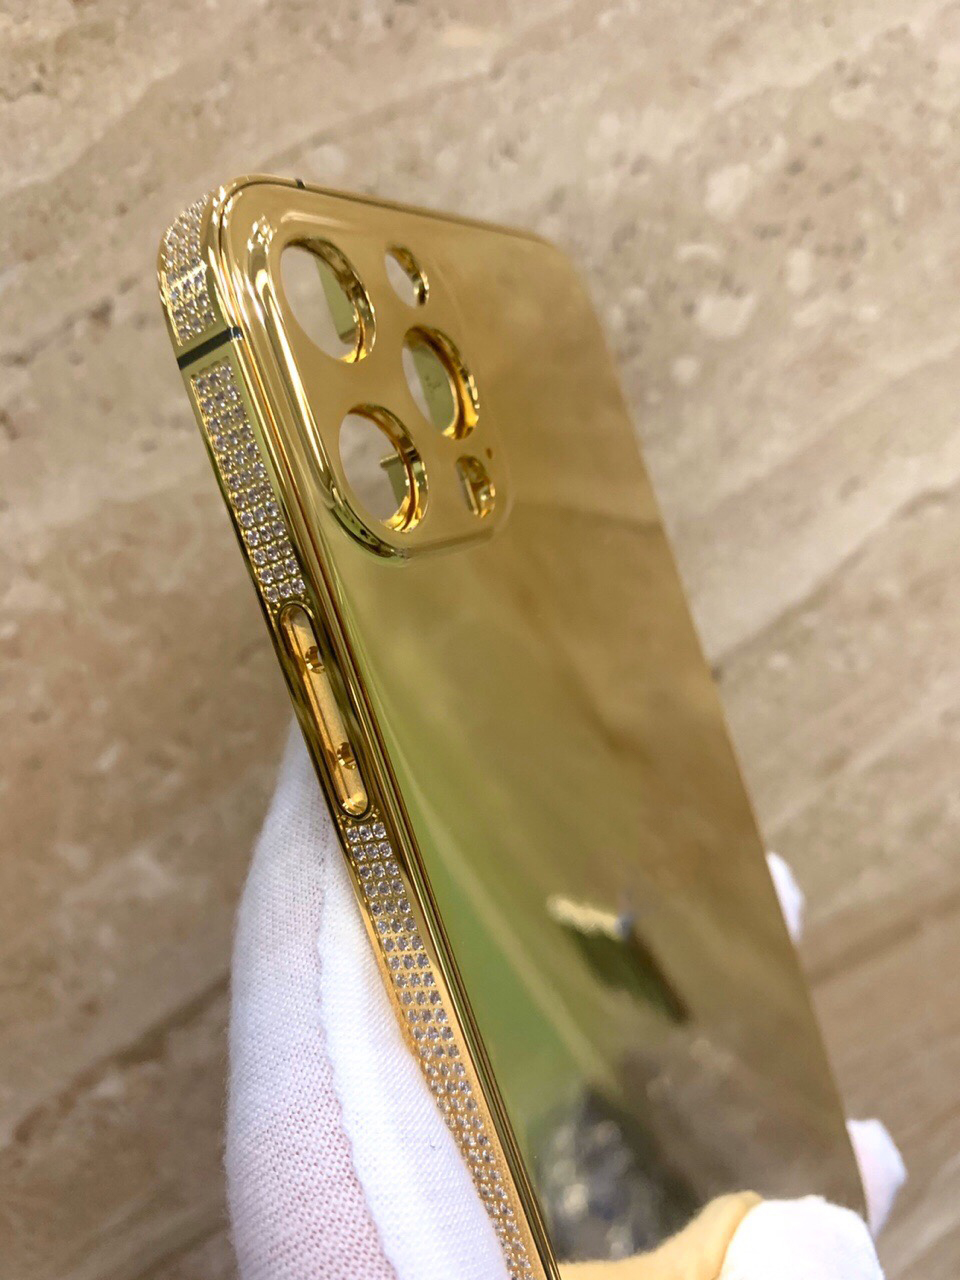 24k Gold Edition Protect Case For Iphone 12 Iphone 12 Pro And Iphone 12 Pro Max Gold Plated Protective Case For Iphone 12 Buy Online At Best Prices In Pakistan Daraz Pk